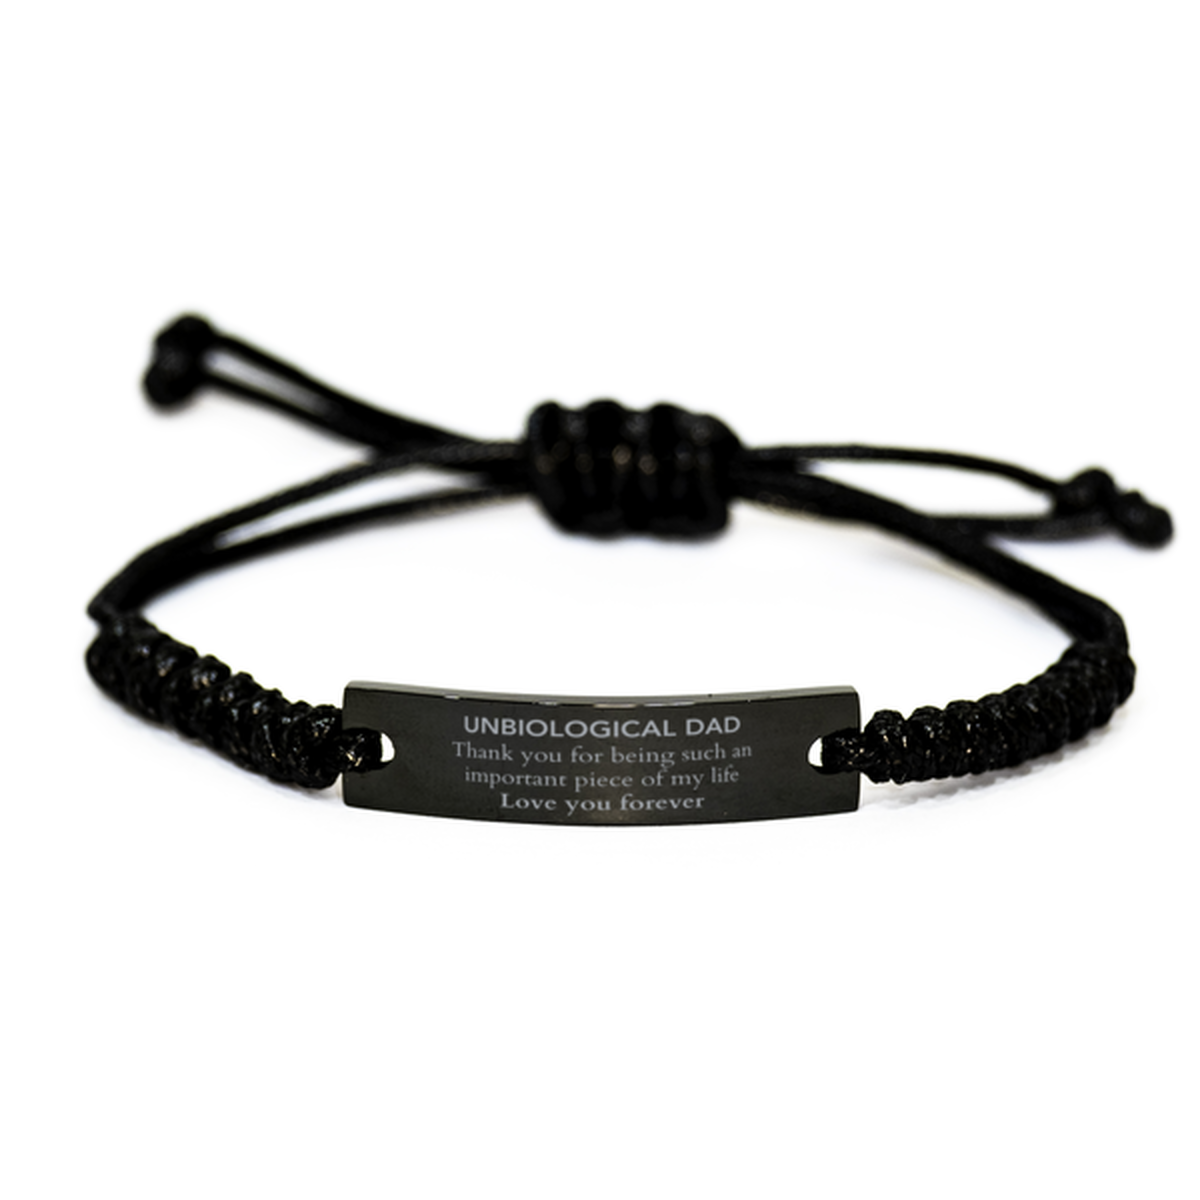 Appropriate Unbiological Dad Black Rope Bracelet Epic Birthday Gifts for Unbiological Dad Thank you for being such an important piece of my life Unbiological Dad Christmas Mothers Fathers Day